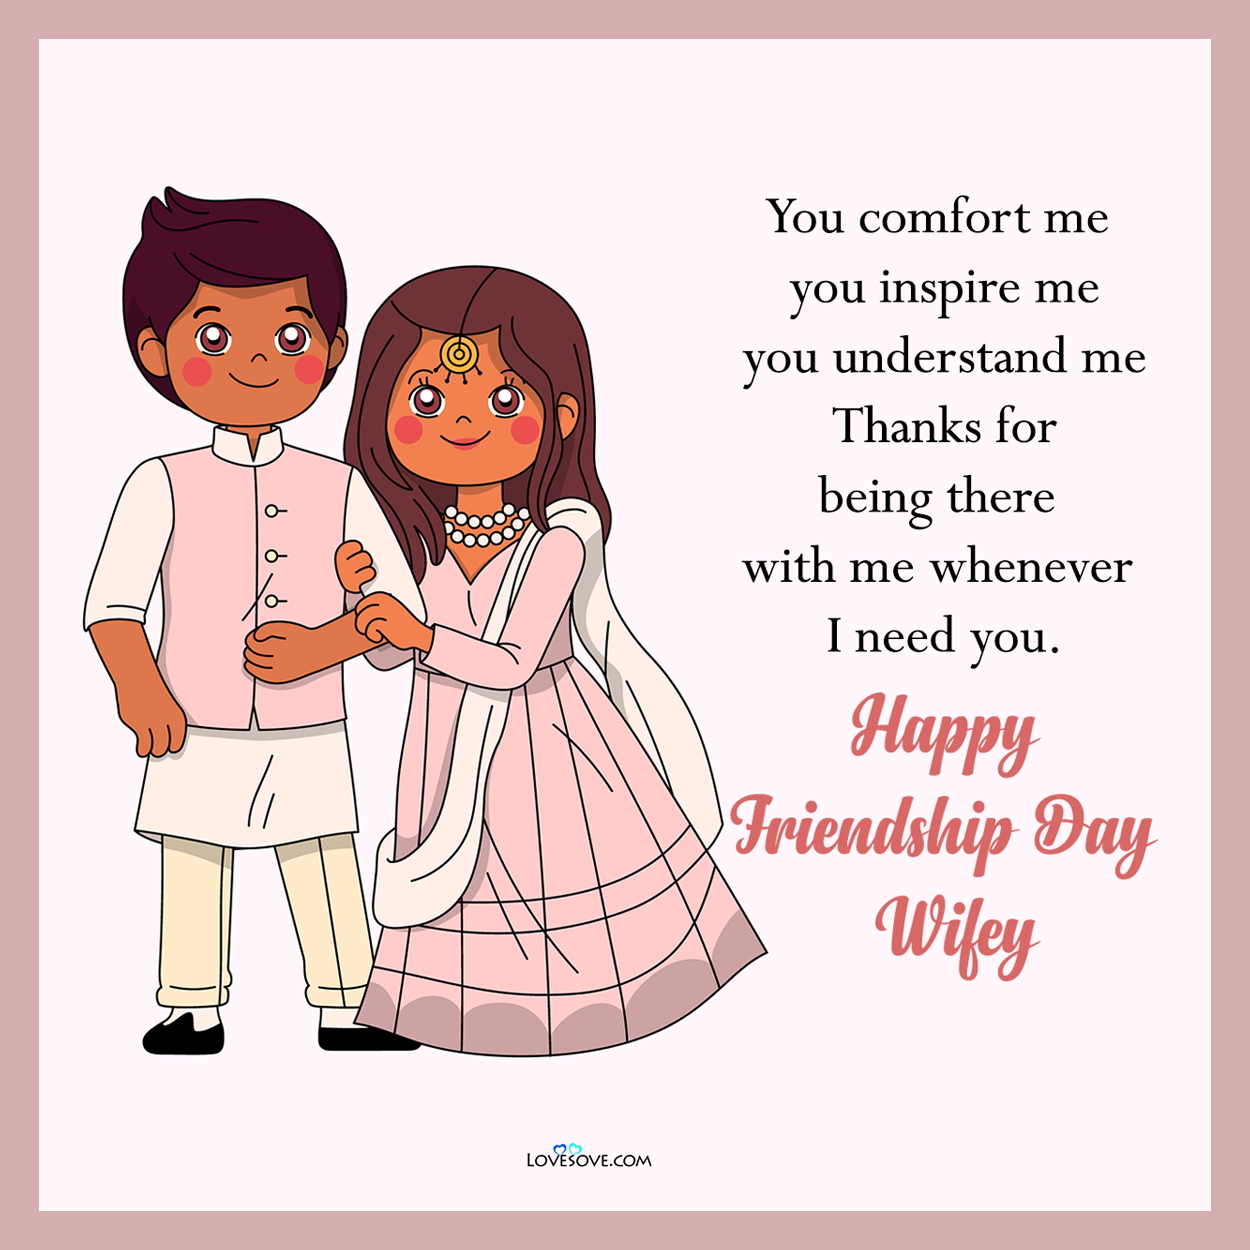 happy friendship day for wife english lovesove 1, important days